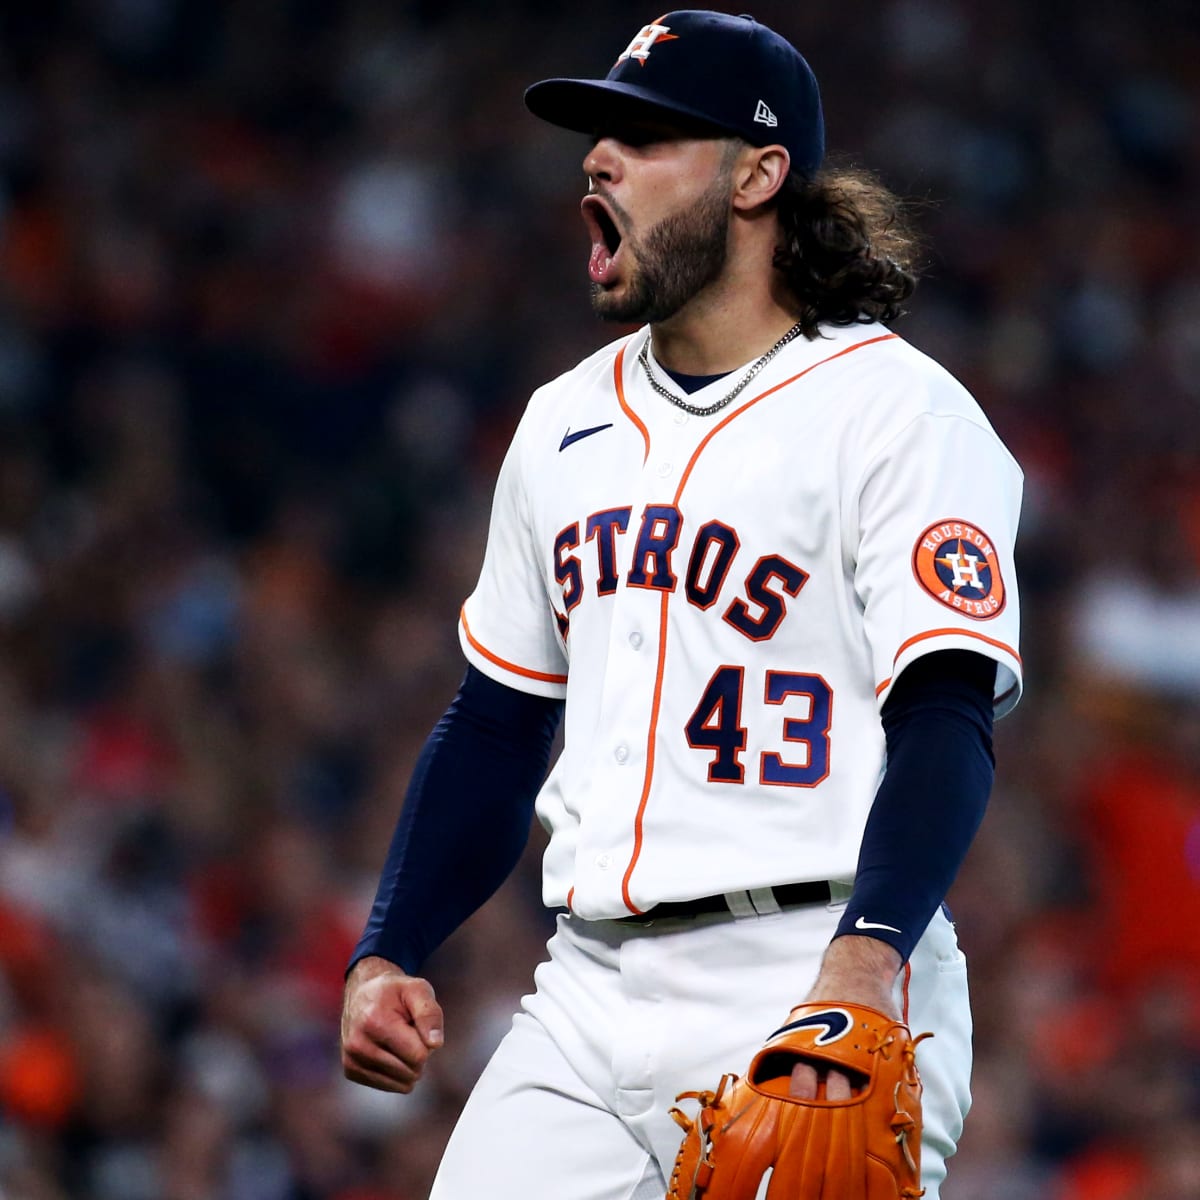 Astros pitcher Lance McCullers Jr. to miss remainder of season